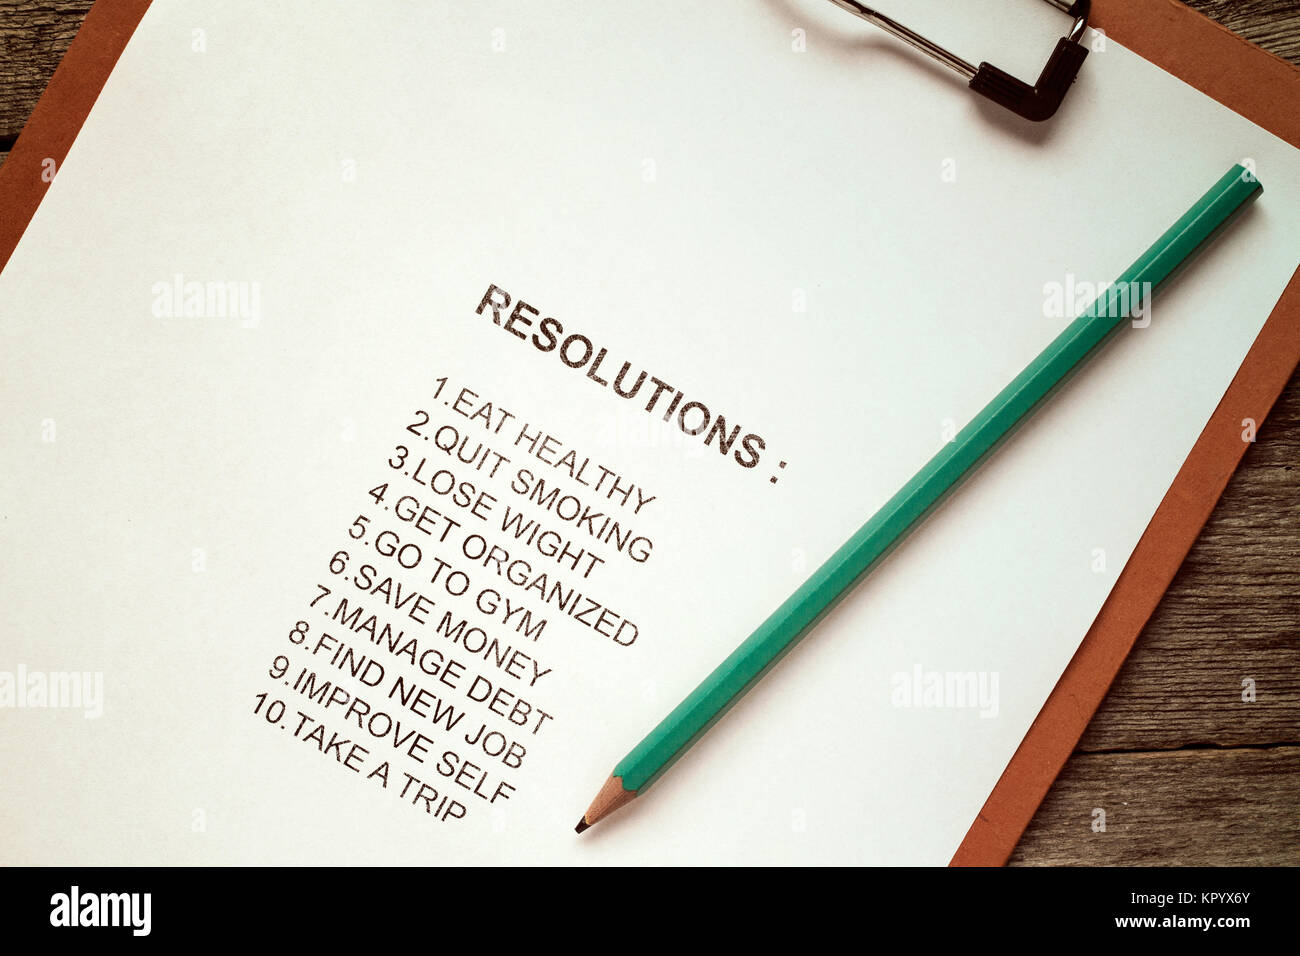 Clipboard with list of resolutions Stock Photo